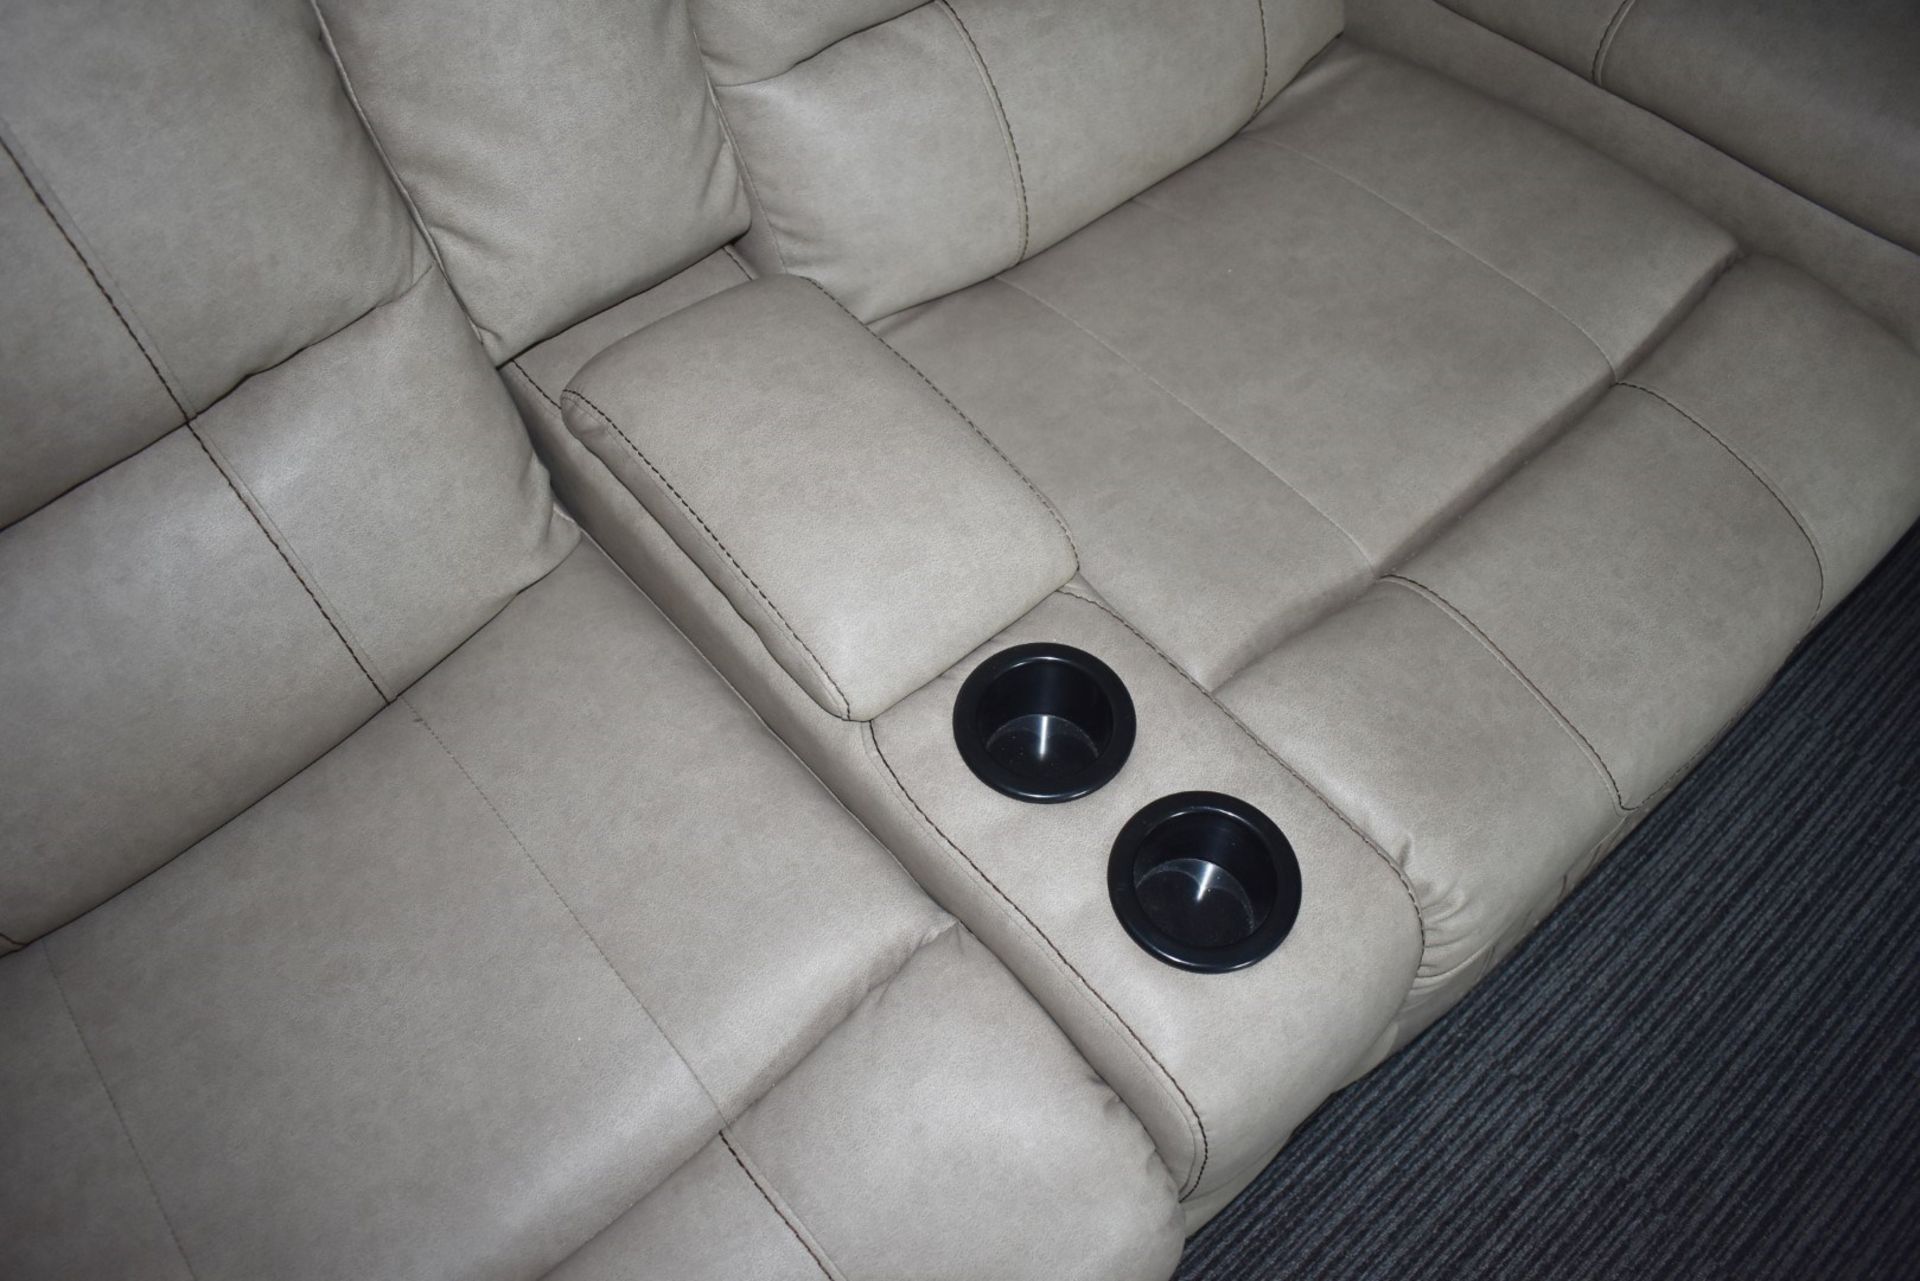 1 x Thomas Payne Reclining Wallhugger Theater Seating Love Seat Couch With Center Console and - Image 4 of 12